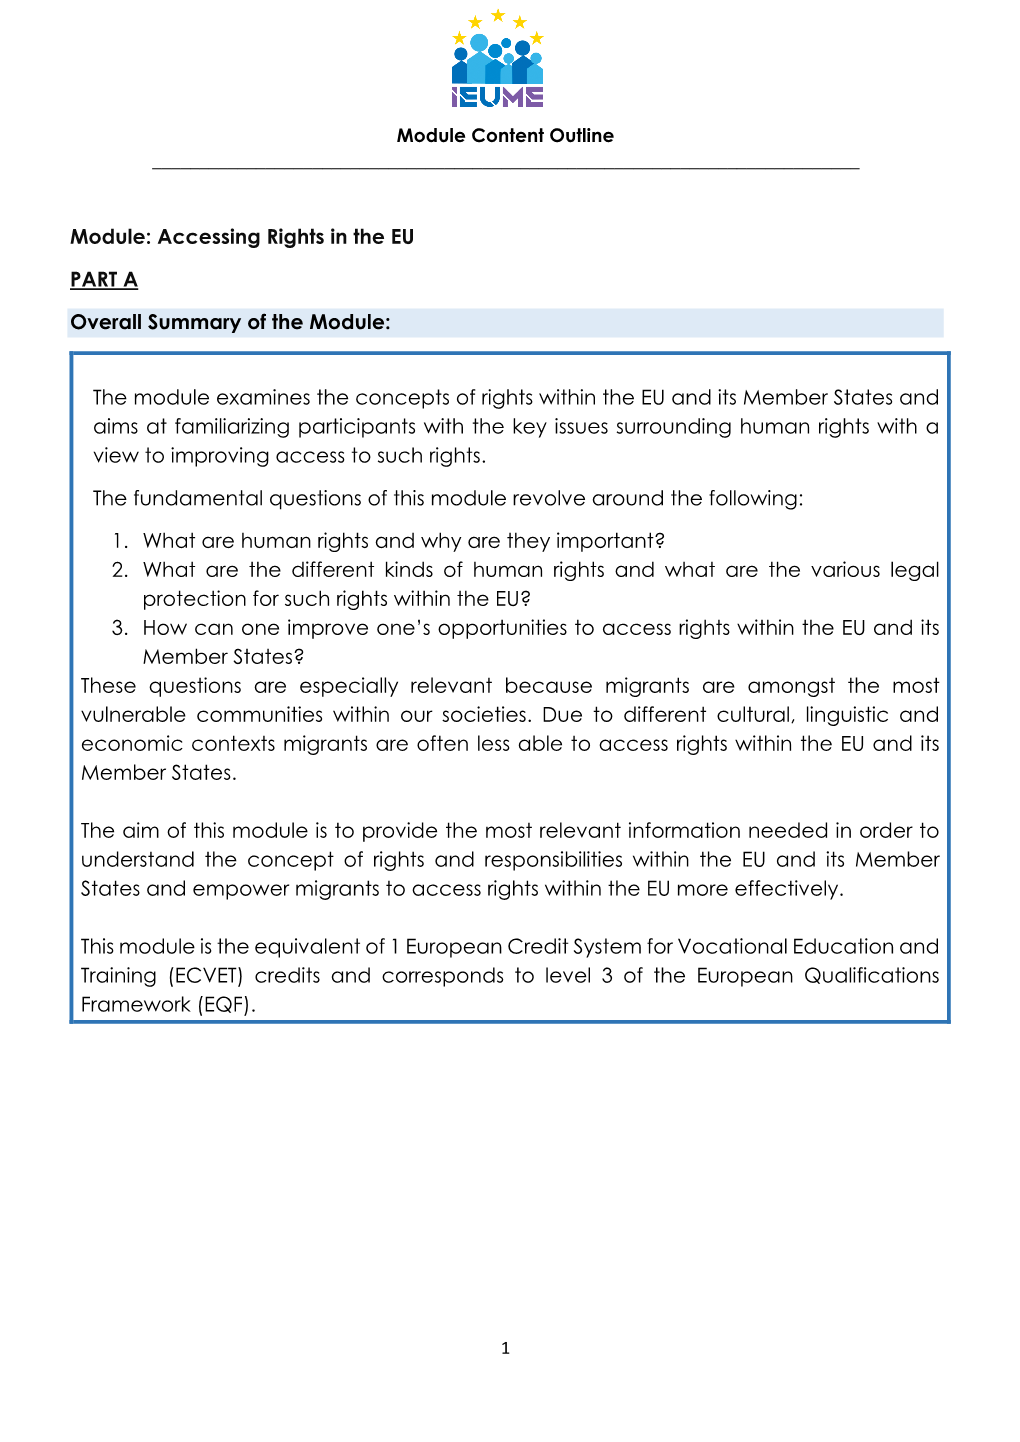 Accessing Rights in the EU PART a Overall Summary of the Module